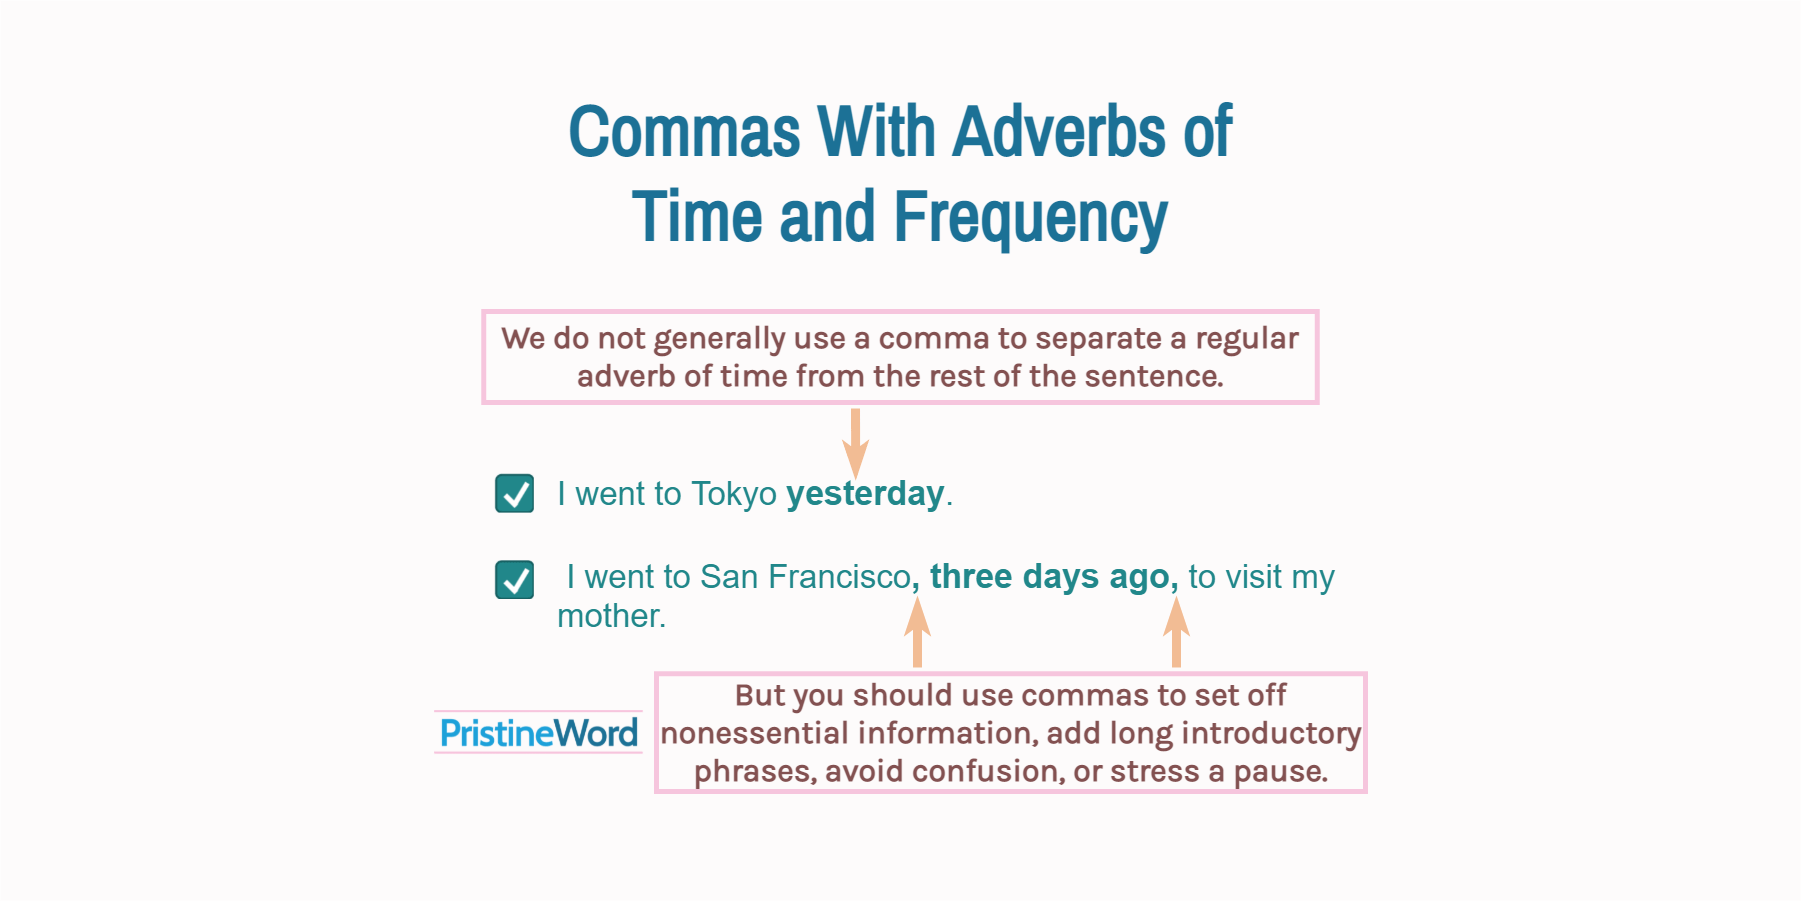 Commas With Adverbs of Time and Frequency